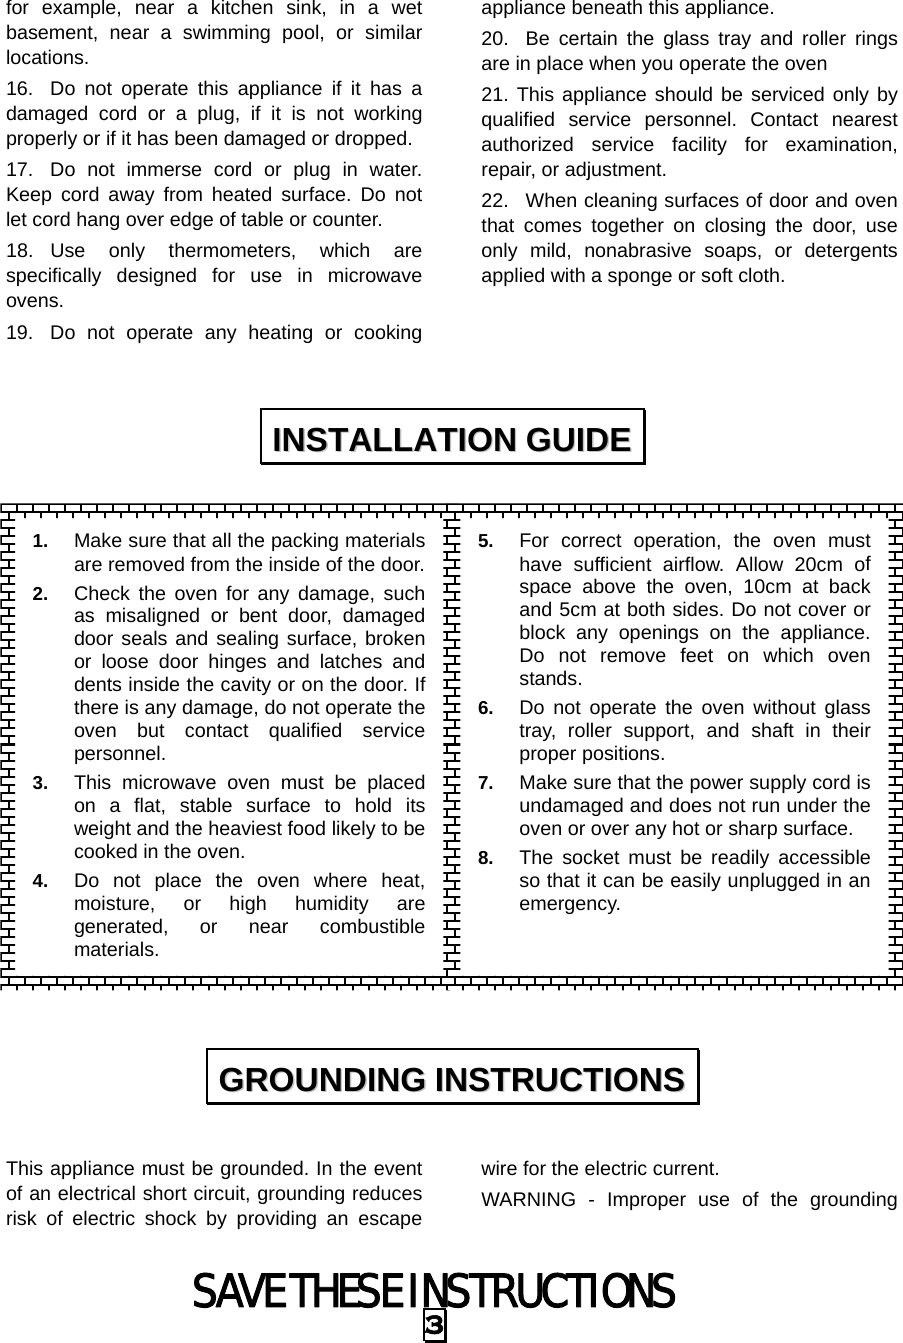 SAVE THESE INSTRUCTIONS 3 for example, near a kitchen sink, in a wet basement, near a swimming pool, or similar locations. 16.  Do not operate this appliance if it has a damaged cord or a plug, if it is not working properly or if it has been damaged or dropped. 17.  Do not immerse cord or plug in water. Keep cord away from heated surface. Do not let cord hang over edge of table or counter. 18. Use only thermometers, which are specifically designed for use in microwave ovens. 19.  Do not operate any heating or cooking appliance beneath this appliance. 20.  Be certain the glass tray and roller rings are in place when you operate the oven 21. This appliance should be serviced only by qualified service personnel. Contact nearest authorized service facility for examination, repair, or adjustment. 22.  When cleaning surfaces of door and oven that comes together on closing the door, use only mild, nonabrasive soaps, or detergents applied with a sponge or soft cloth.                     This appliance must be grounded. In the event of an electrical short circuit, grounding reduces risk of electric shock by providing an escape wire for the electric current.   WARNING - Improper use of the grounding IINNSSTTAALLLLAATTIIOONN  GGUUIIDDEE  GGRROOUUNNDDIINNGG  IINNSSTTRRUUCCTTIIOONNSS  1.  Make sure that all the packing materialsare removed from the inside of the door.2.  Check the oven for any damage, suchas misaligned or bent door, damageddoor seals and sealing surface, brokenor loose door hinges and latches anddents inside the cavity or on the door. Ifthere is any damage, do not operate theoven but contact qualified servicepersonnel. 3.  This microwave oven must be placedon a flat, stable surface to hold itsweight and the heaviest food likely to becooked in the oven.   4.  Do not place the oven where heat,moisture, or high humidity aregenerated, or near combustiblematerials. 5.  For correct operation, the oven must have sufficient airflow. Allow 20cm of space above the oven, 10cm at back and 5cm at both sides. Do not cover or block any openings on the appliance. Do not remove feet on which oven stands. 6.  Do not operate the oven without glass tray, roller support, and shaft in their proper positions.   7.  Make sure that the power supply cord is undamaged and does not run under the oven or over any hot or sharp surface. 8.  The socket must be readily accessible so that it can be easily unplugged in an emergency. 